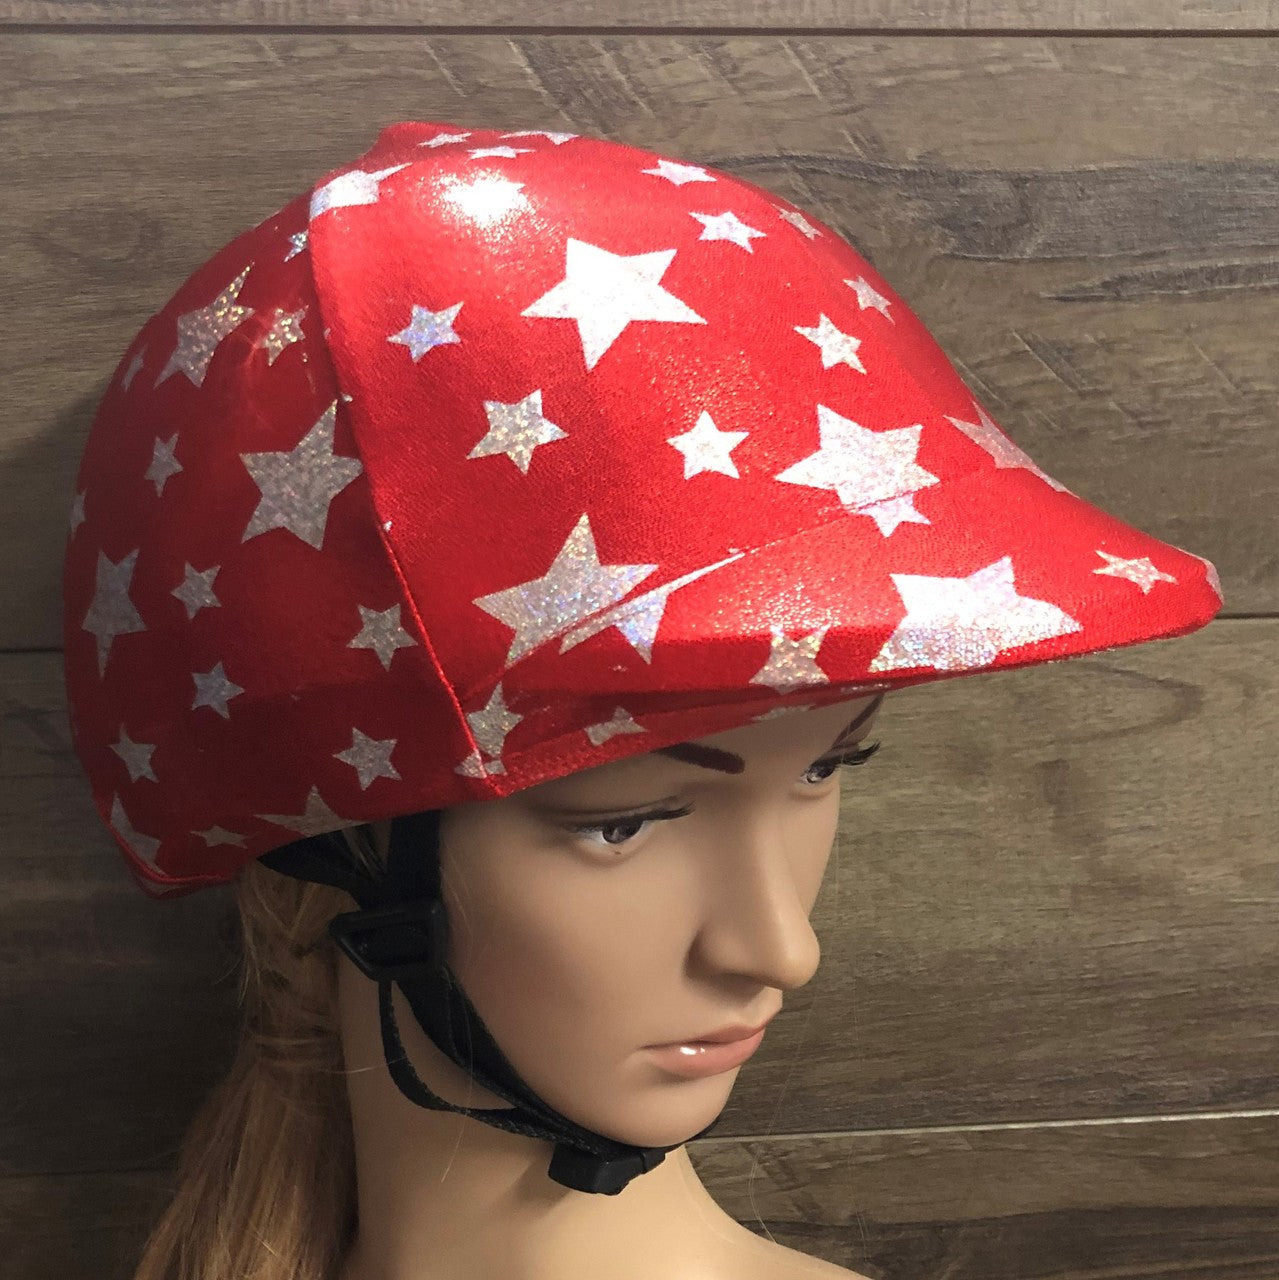 Lycra Helmet Cover - Mixed Colours and Patterns - CLEARANCE